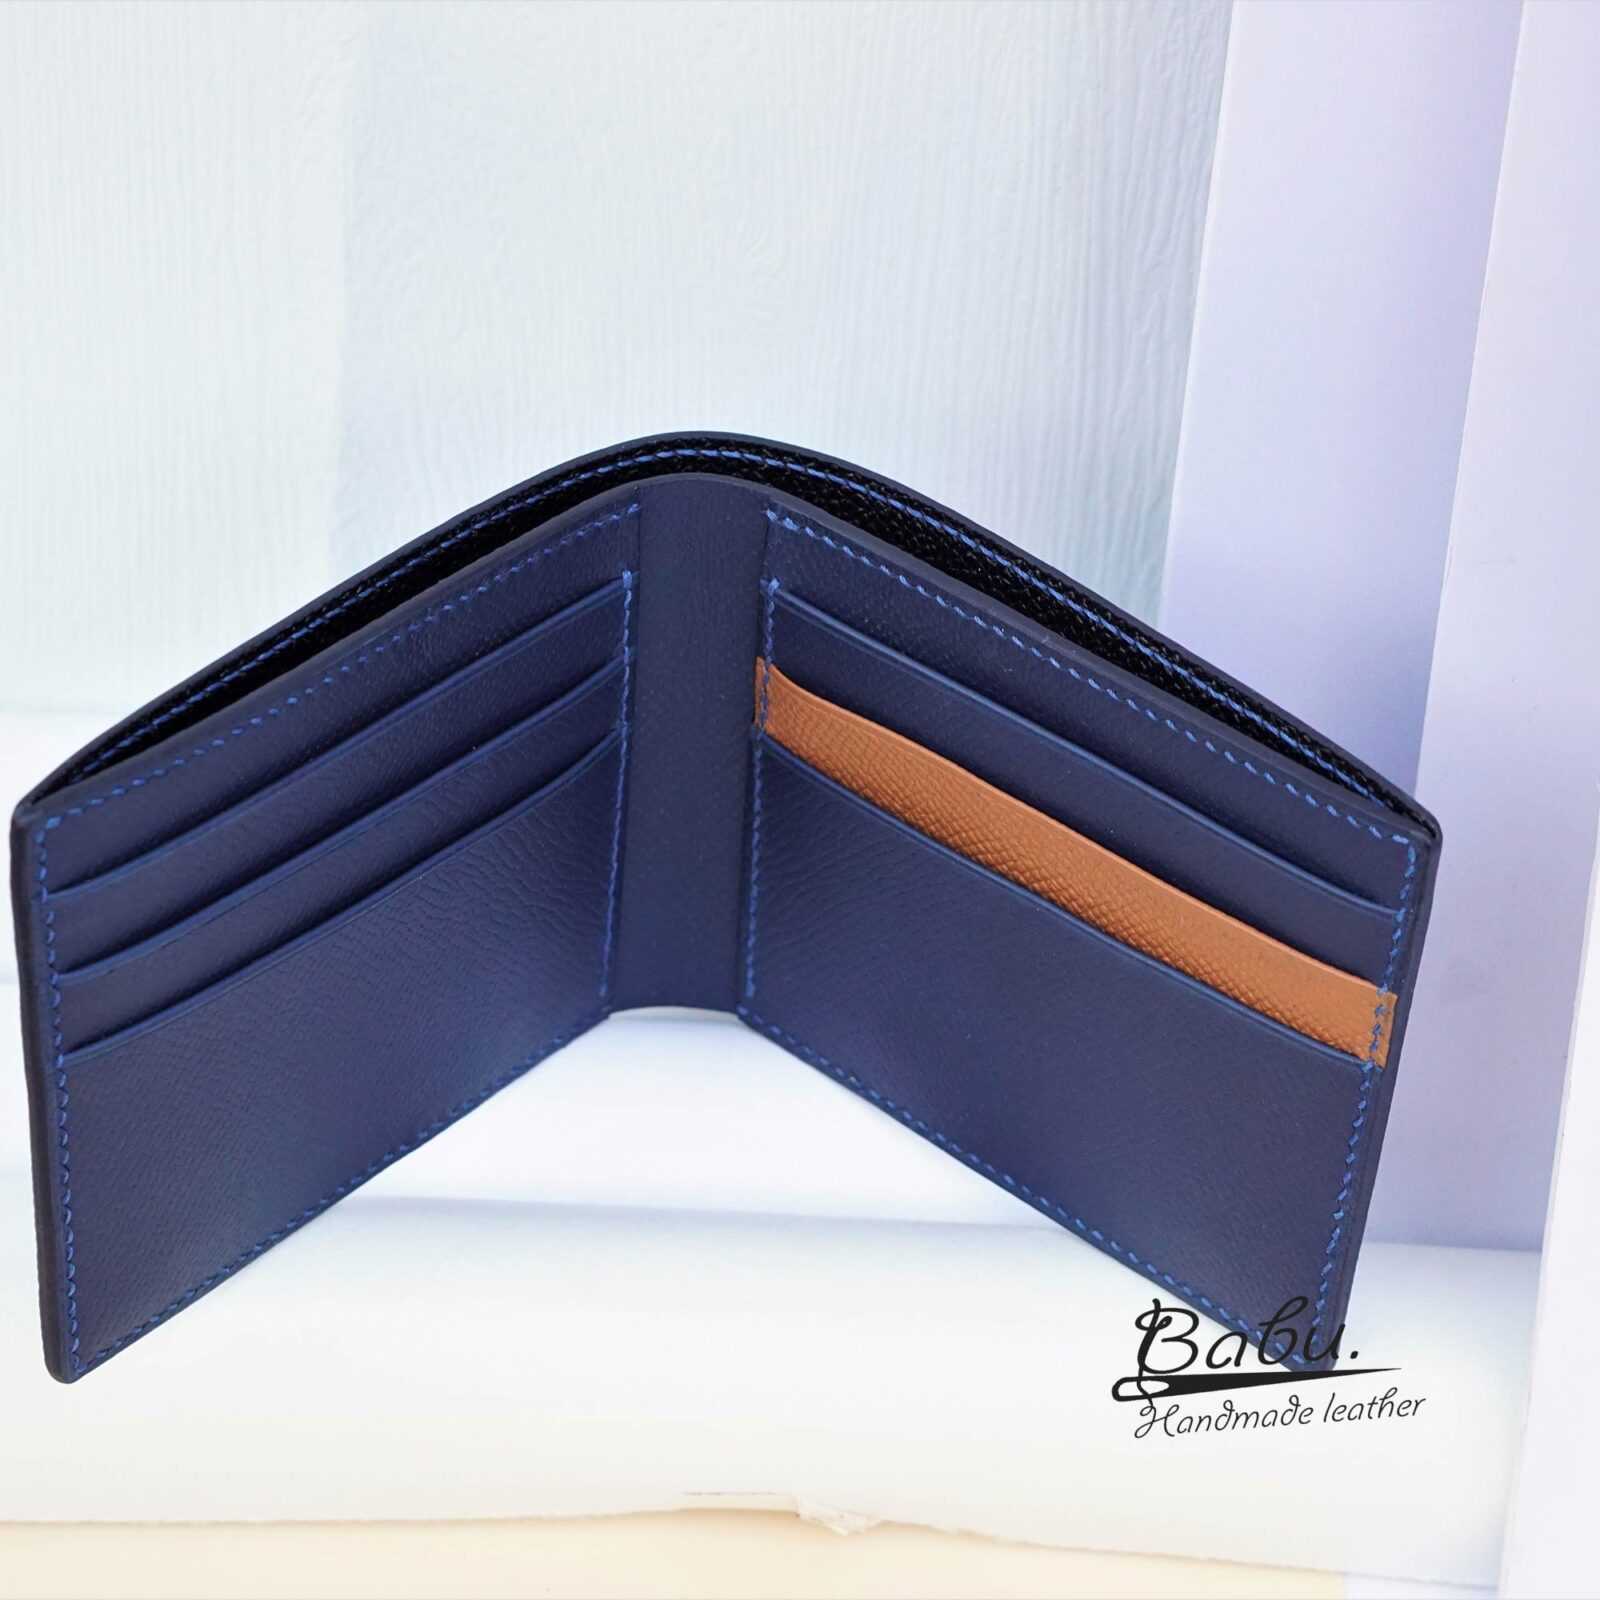 rots President lokaal Navy Blue Epi leather wallet, Calf leather bifold wallet WL276 - Babu  Handmade Leather